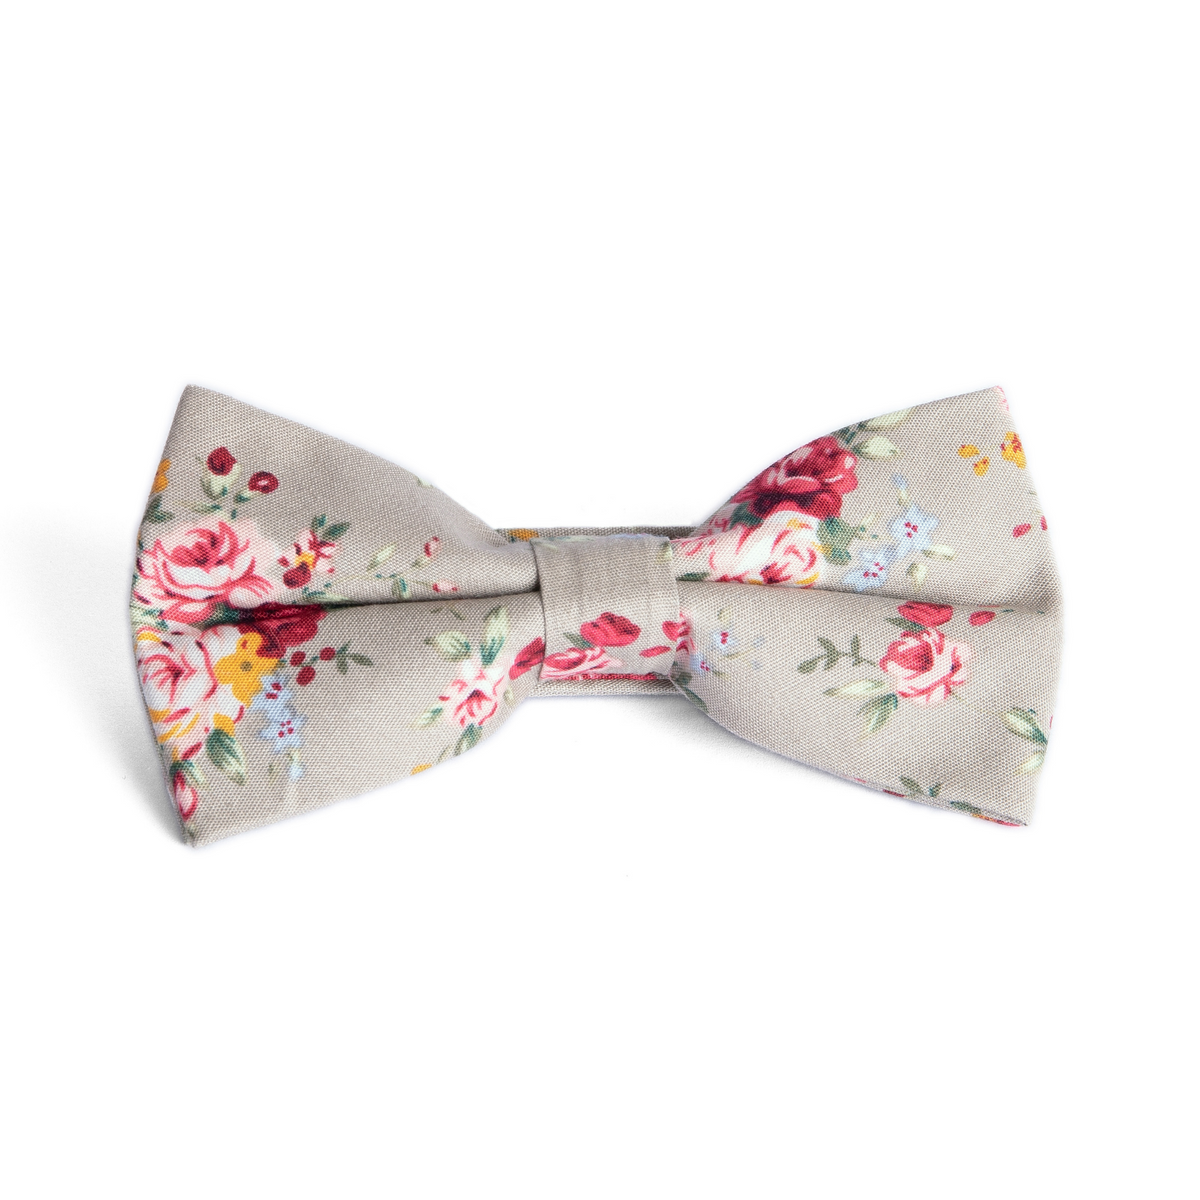 Grey Floral Bow Tie for Weddings